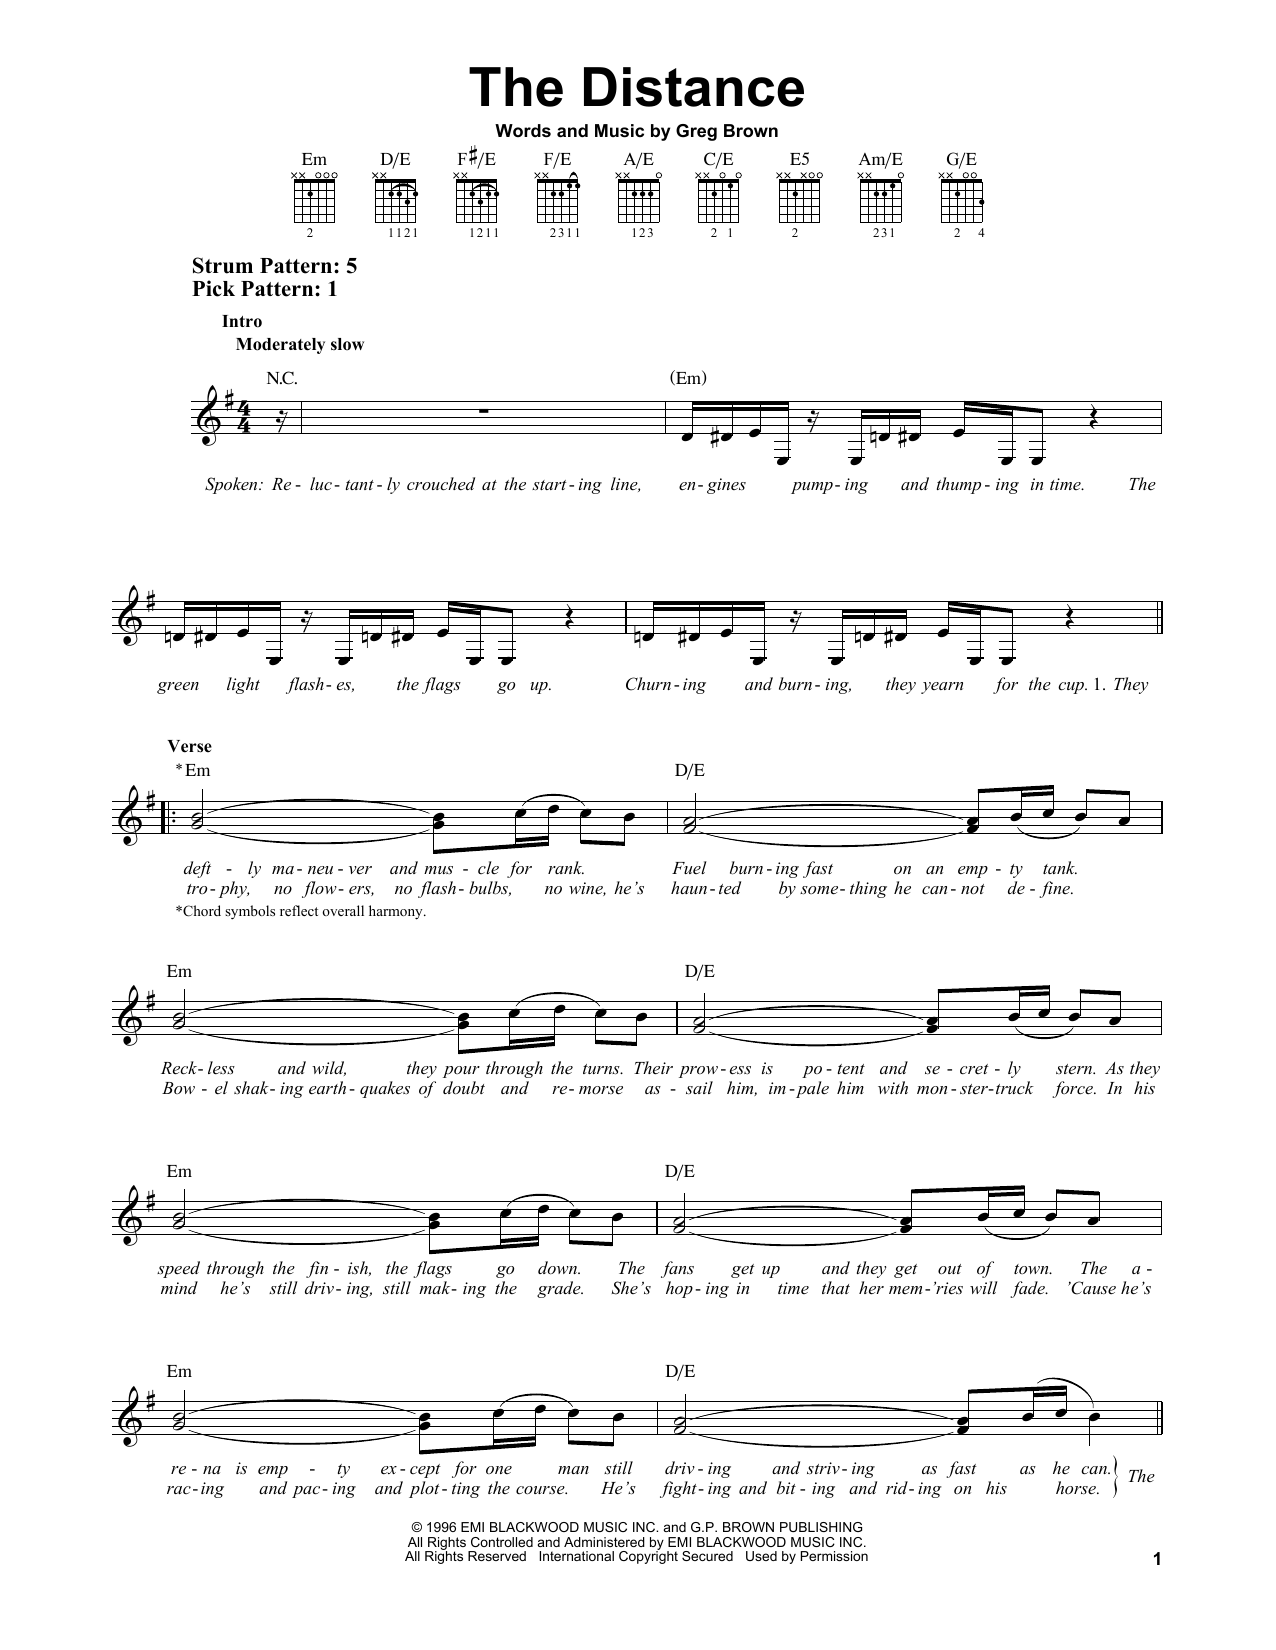 Download Cake The Distance Sheet Music